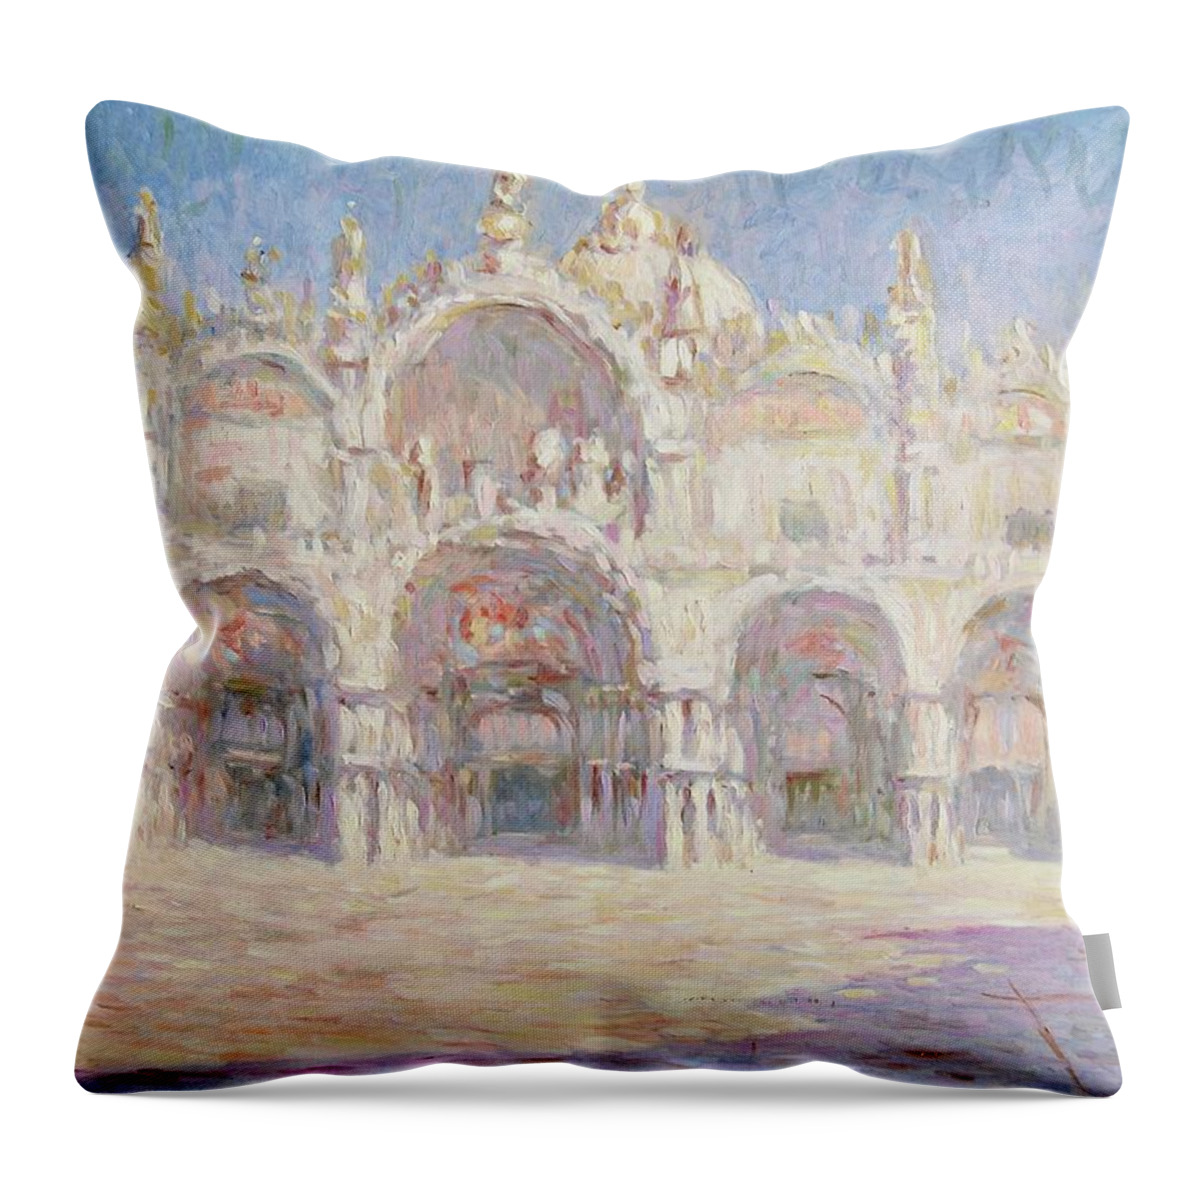 Artpierre Throw Pillow featuring the painting Venice St Marco square by Pierre Dijk